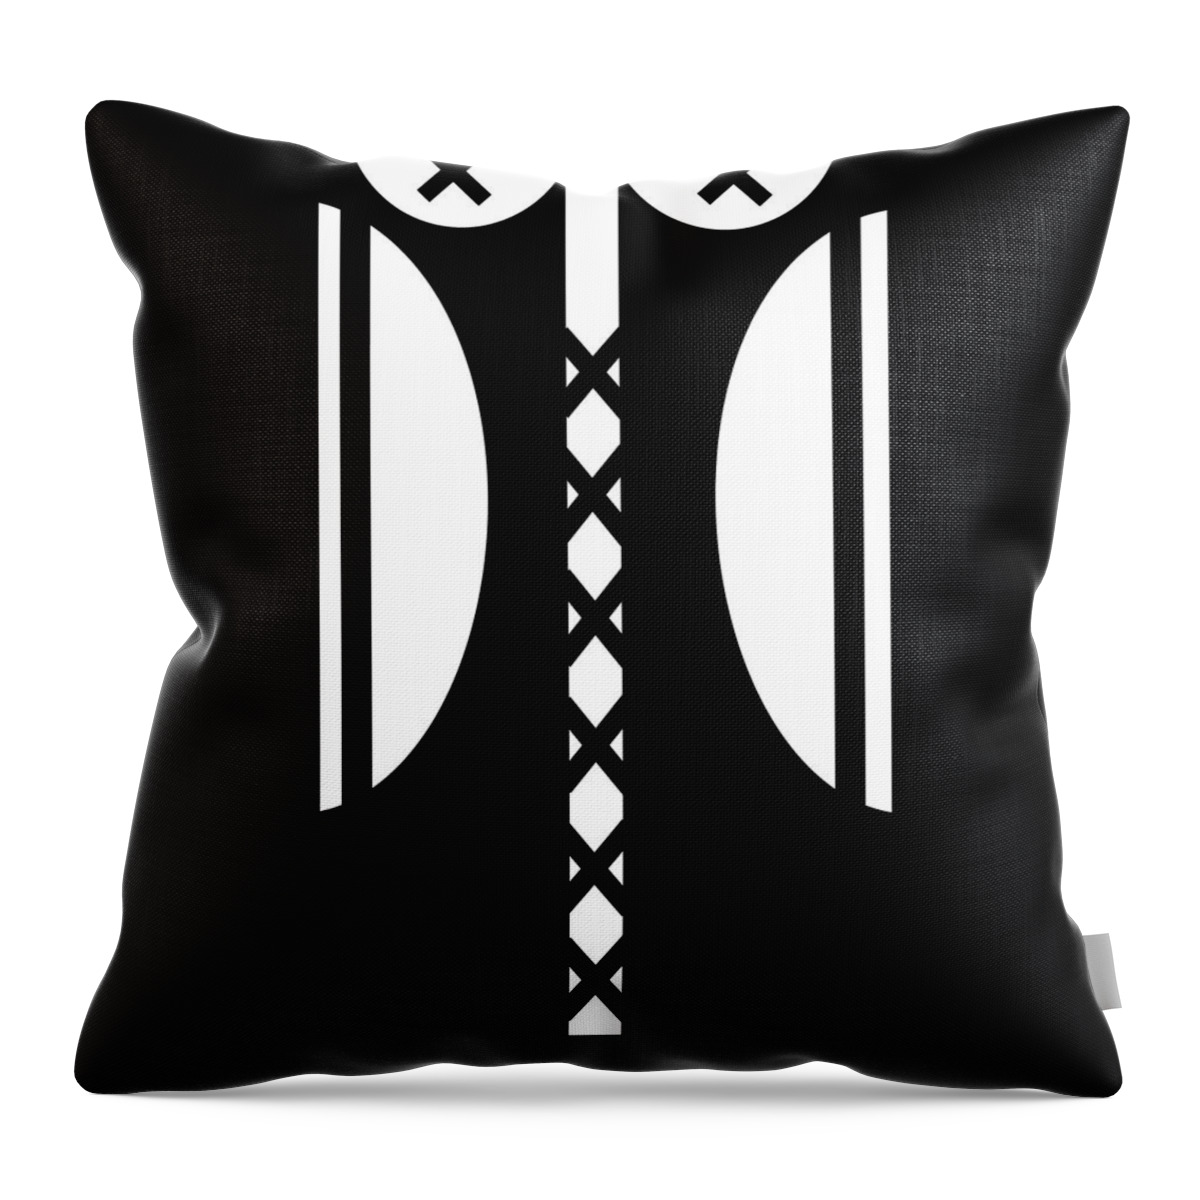 Fetish Throw Pillow featuring the digital art Tight Laced by Roseanne Jones